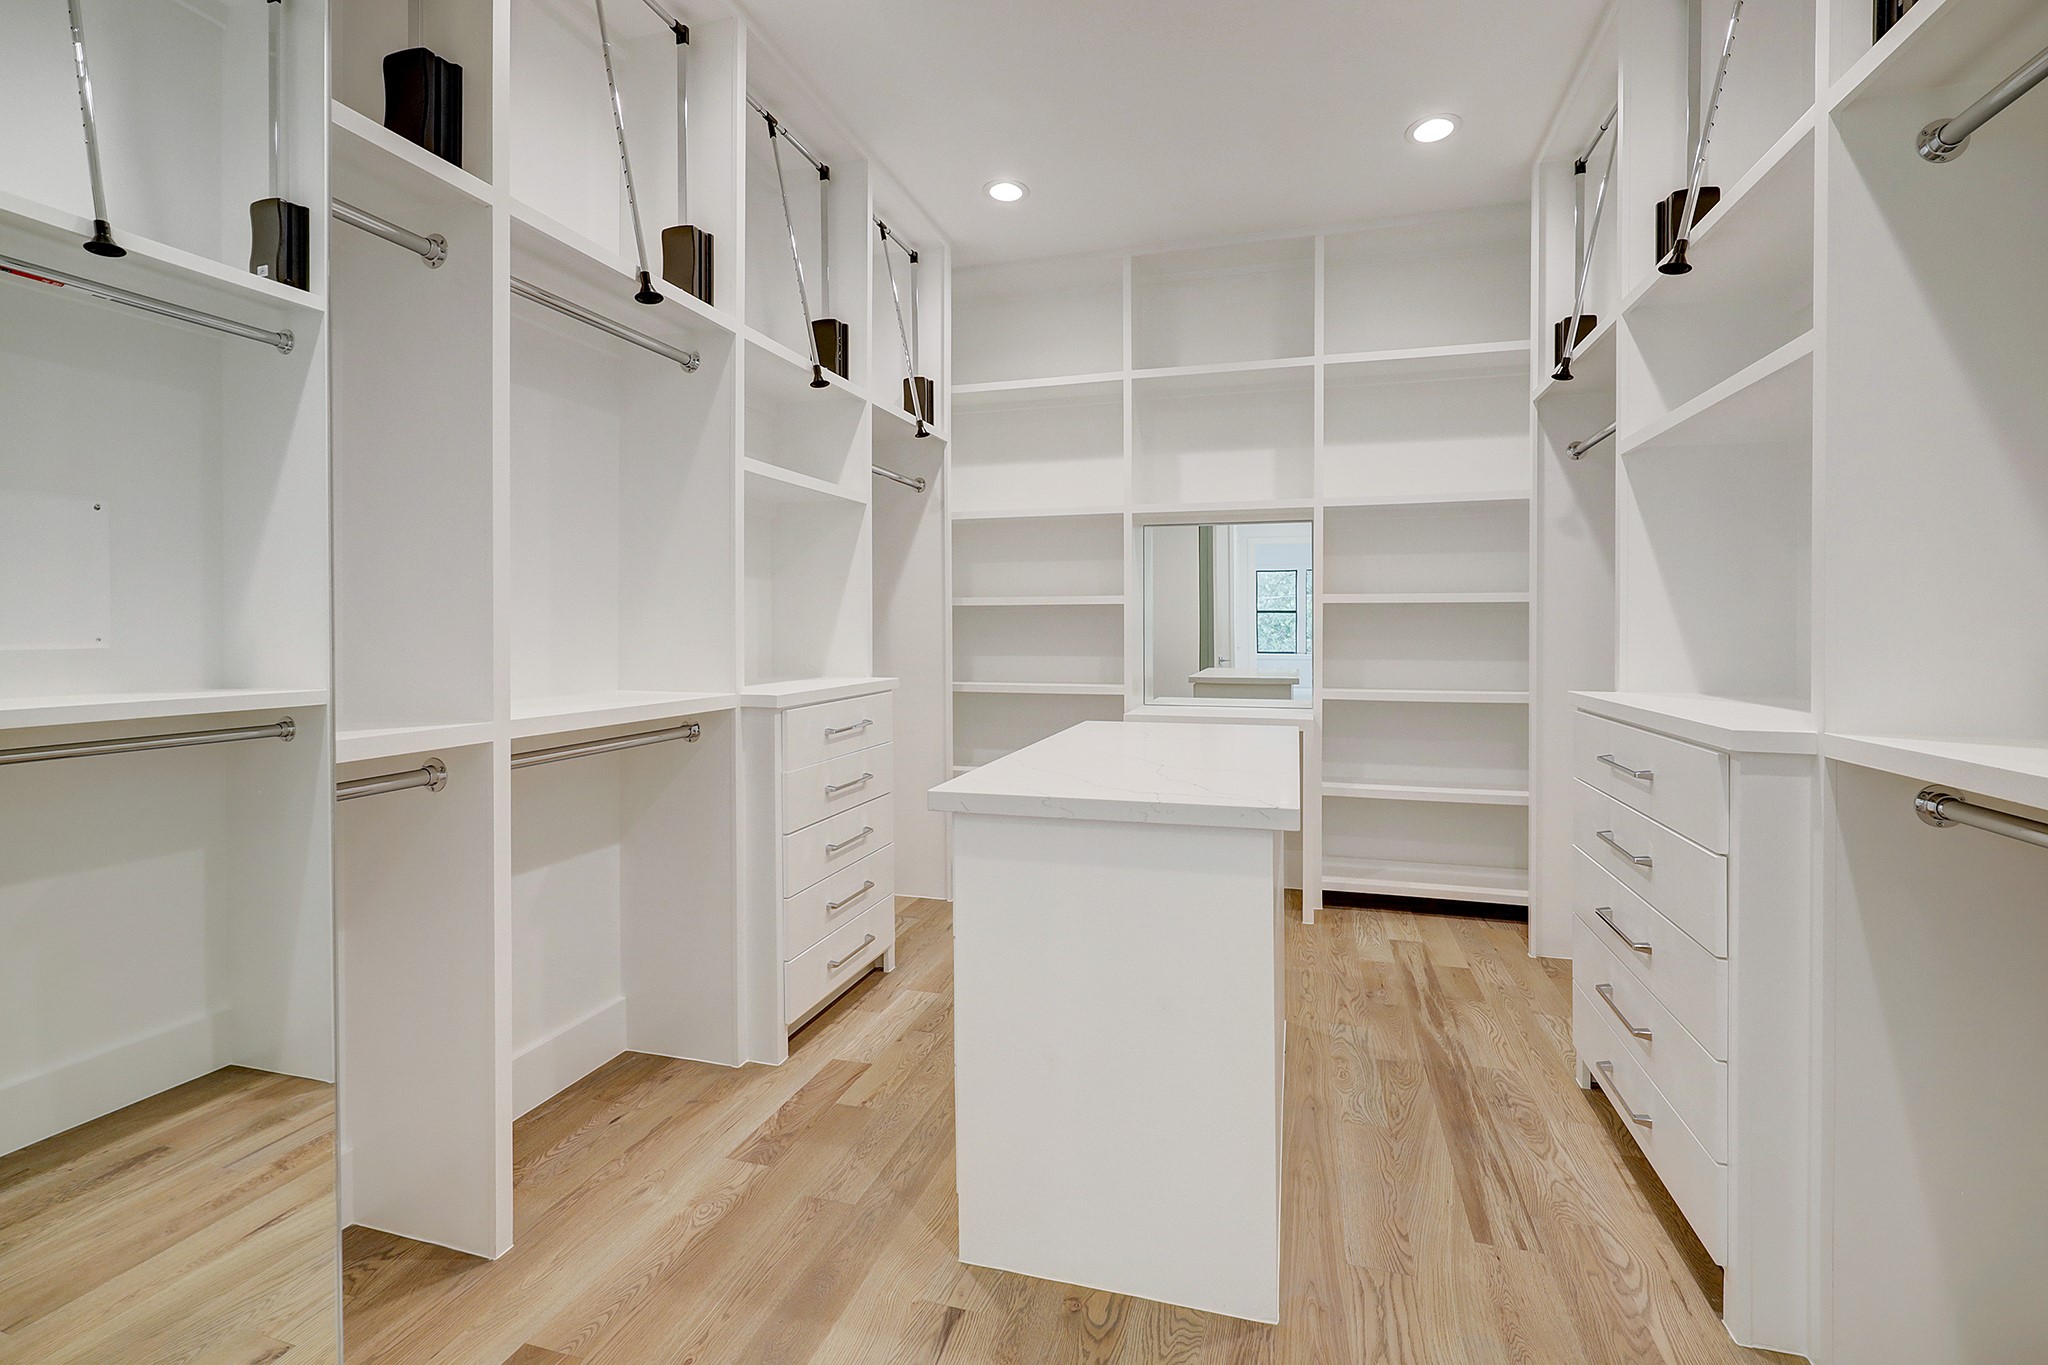 Primary closet with built-in and abundant hanging space